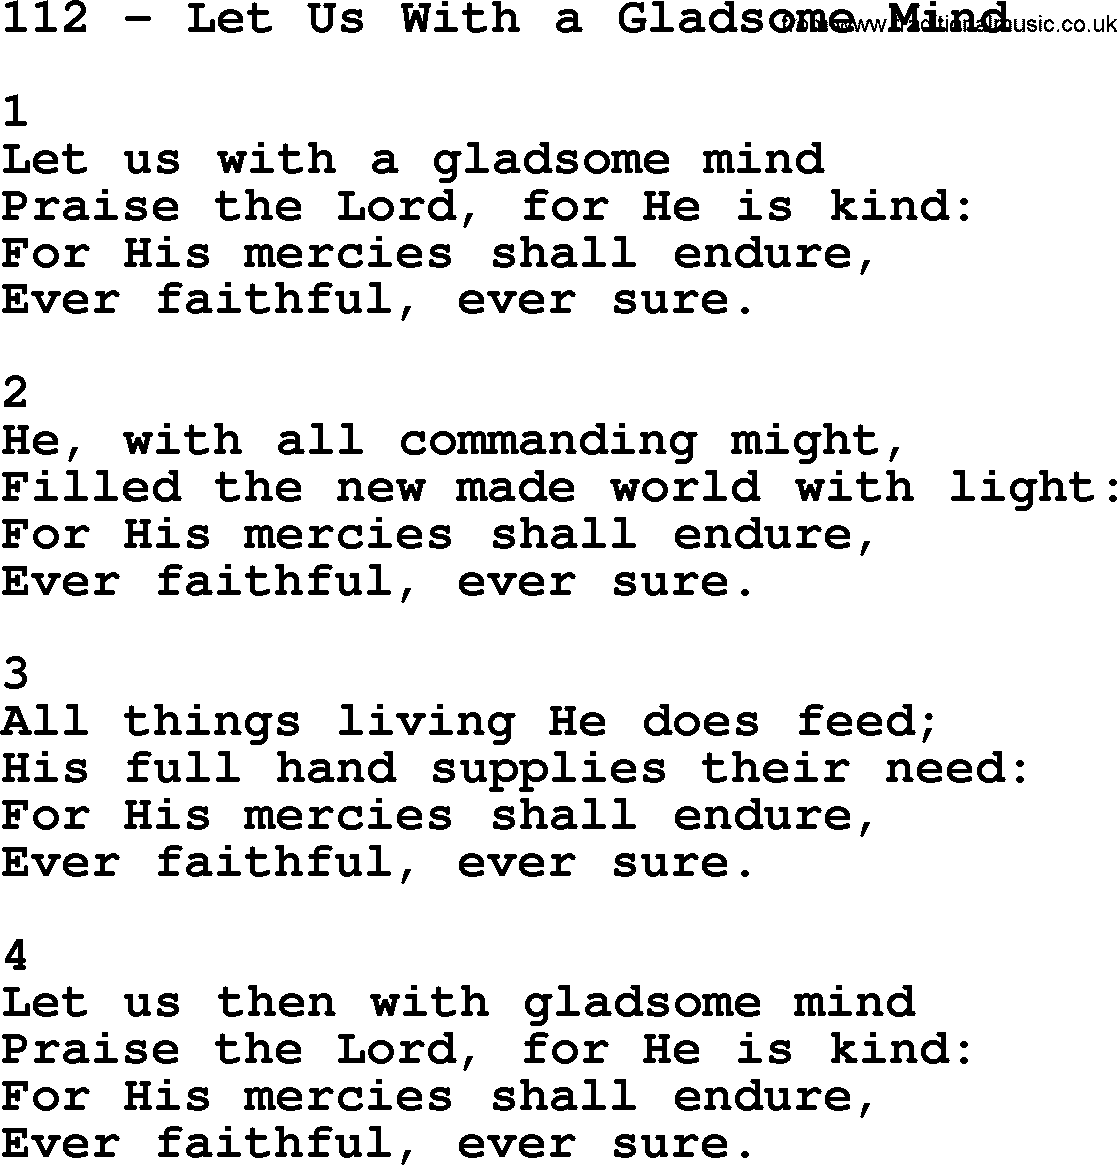 Complete Adventis Hymnal, title: 112-Let Us With A Gladsome Mind, with lyrics, midi, mp3, powerpoints(PPT) and PDF,